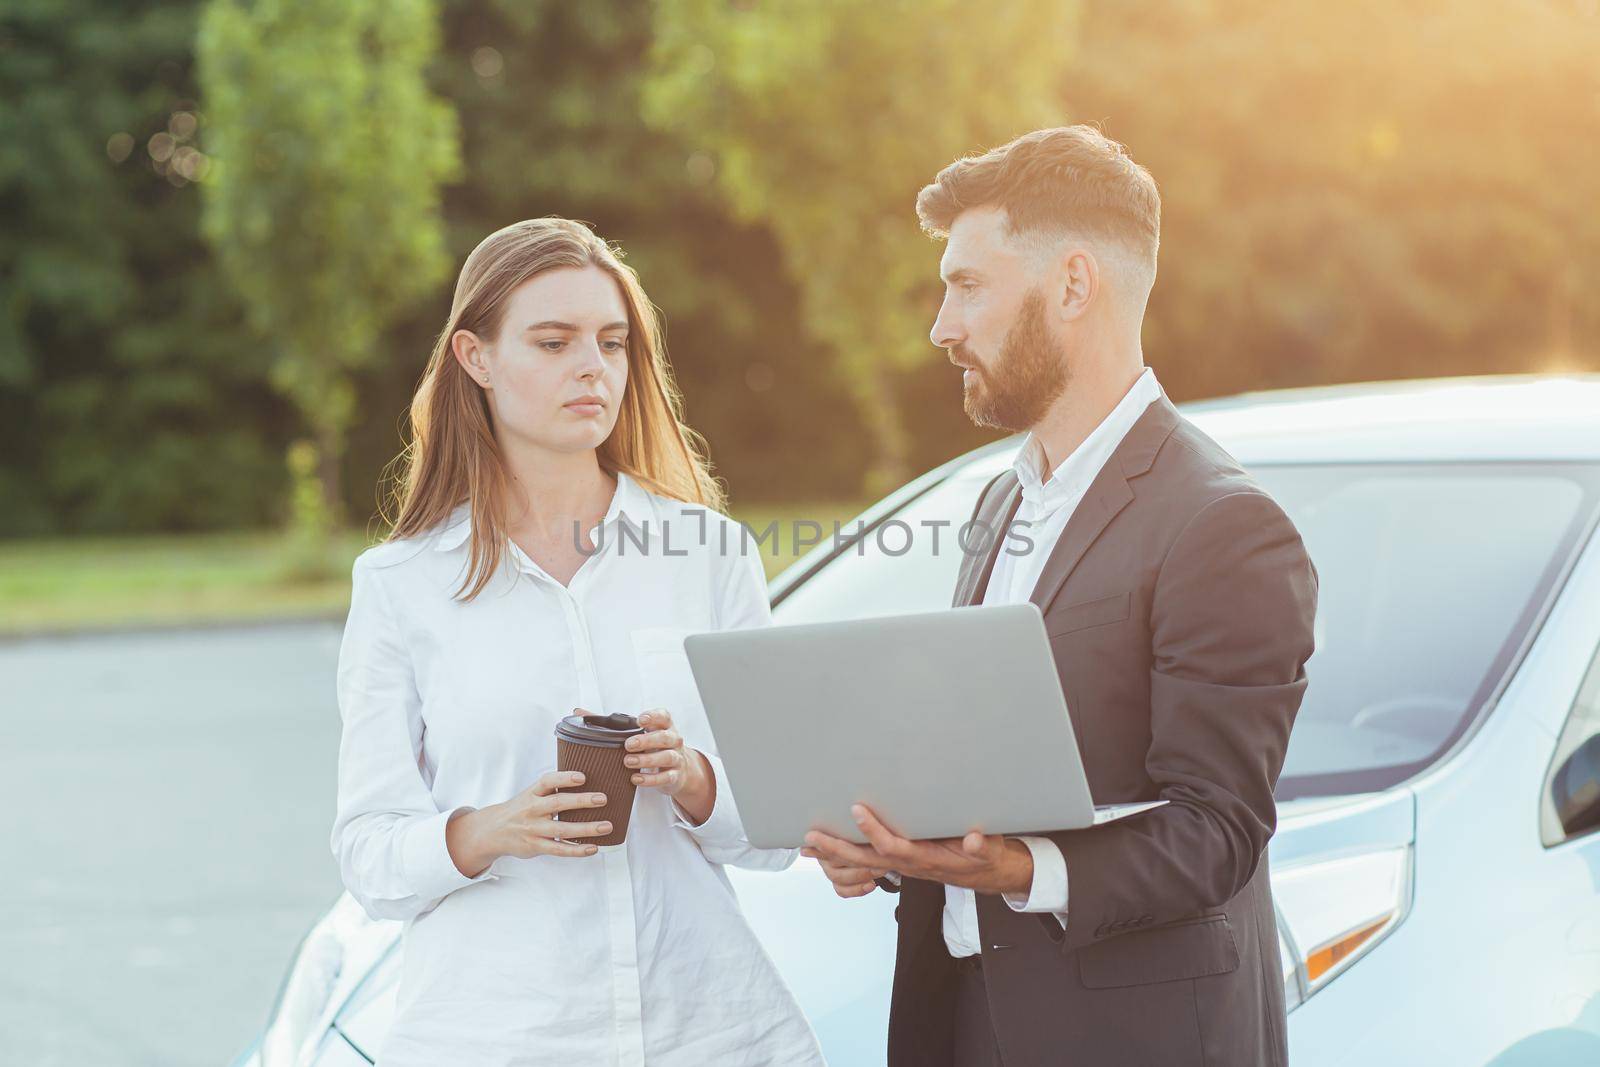 Male car salesman, recommends a car to a woman buyer, inspects cars in the showroom, the seller uses a laptop to view technical information on the car by voronaman